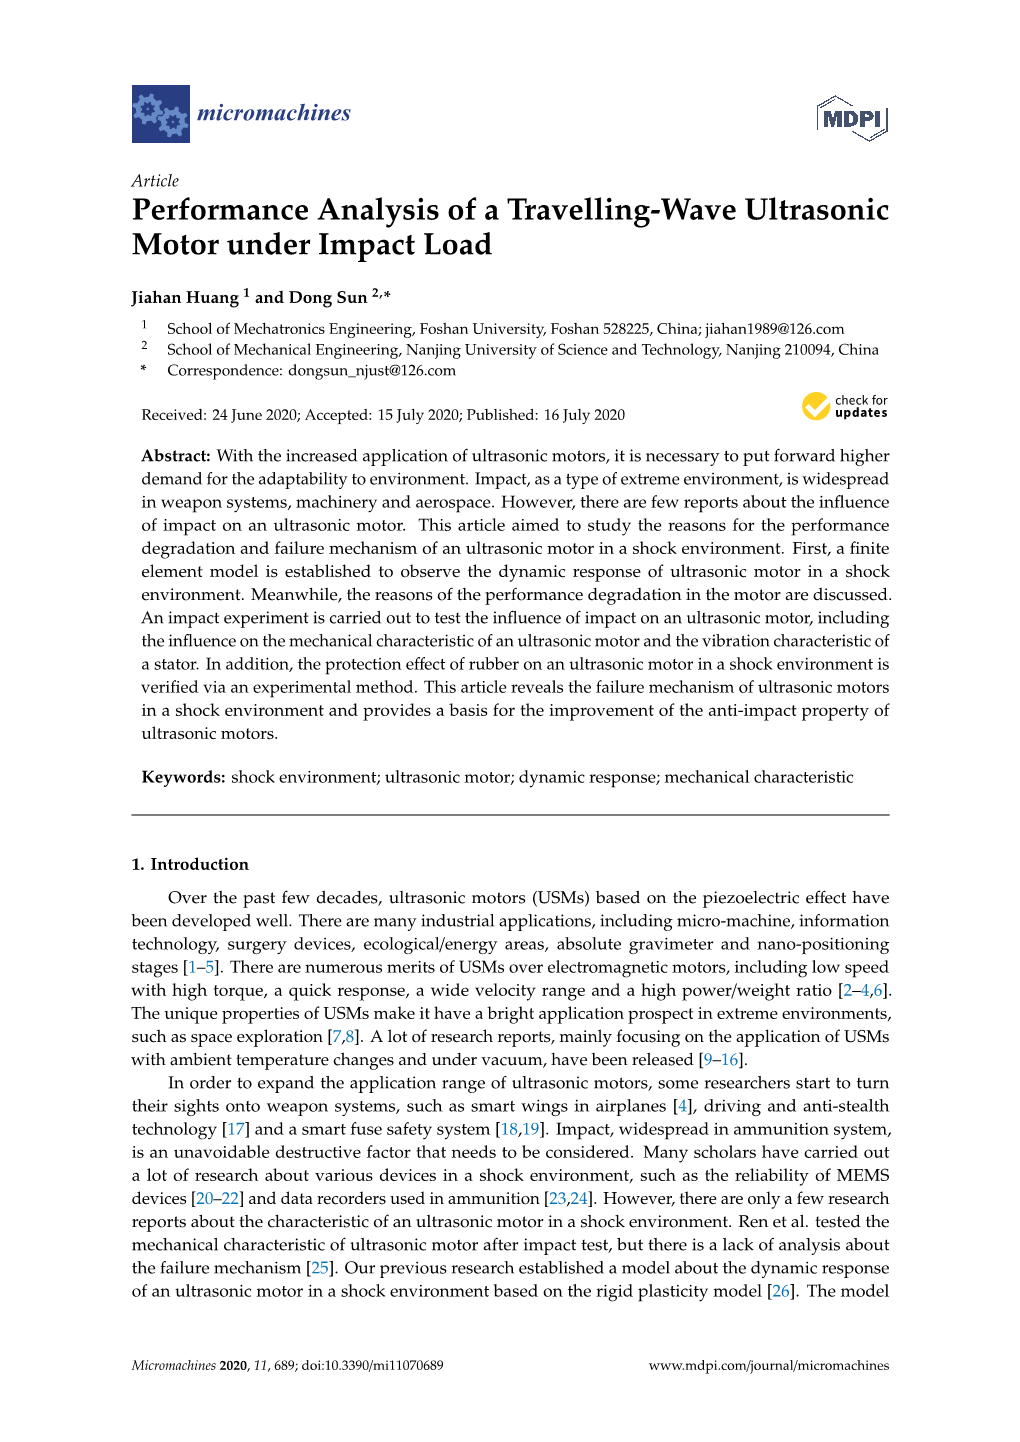 Performance Analysis of a Travelling-Wave Ultrasonic Motor Under Impact Load